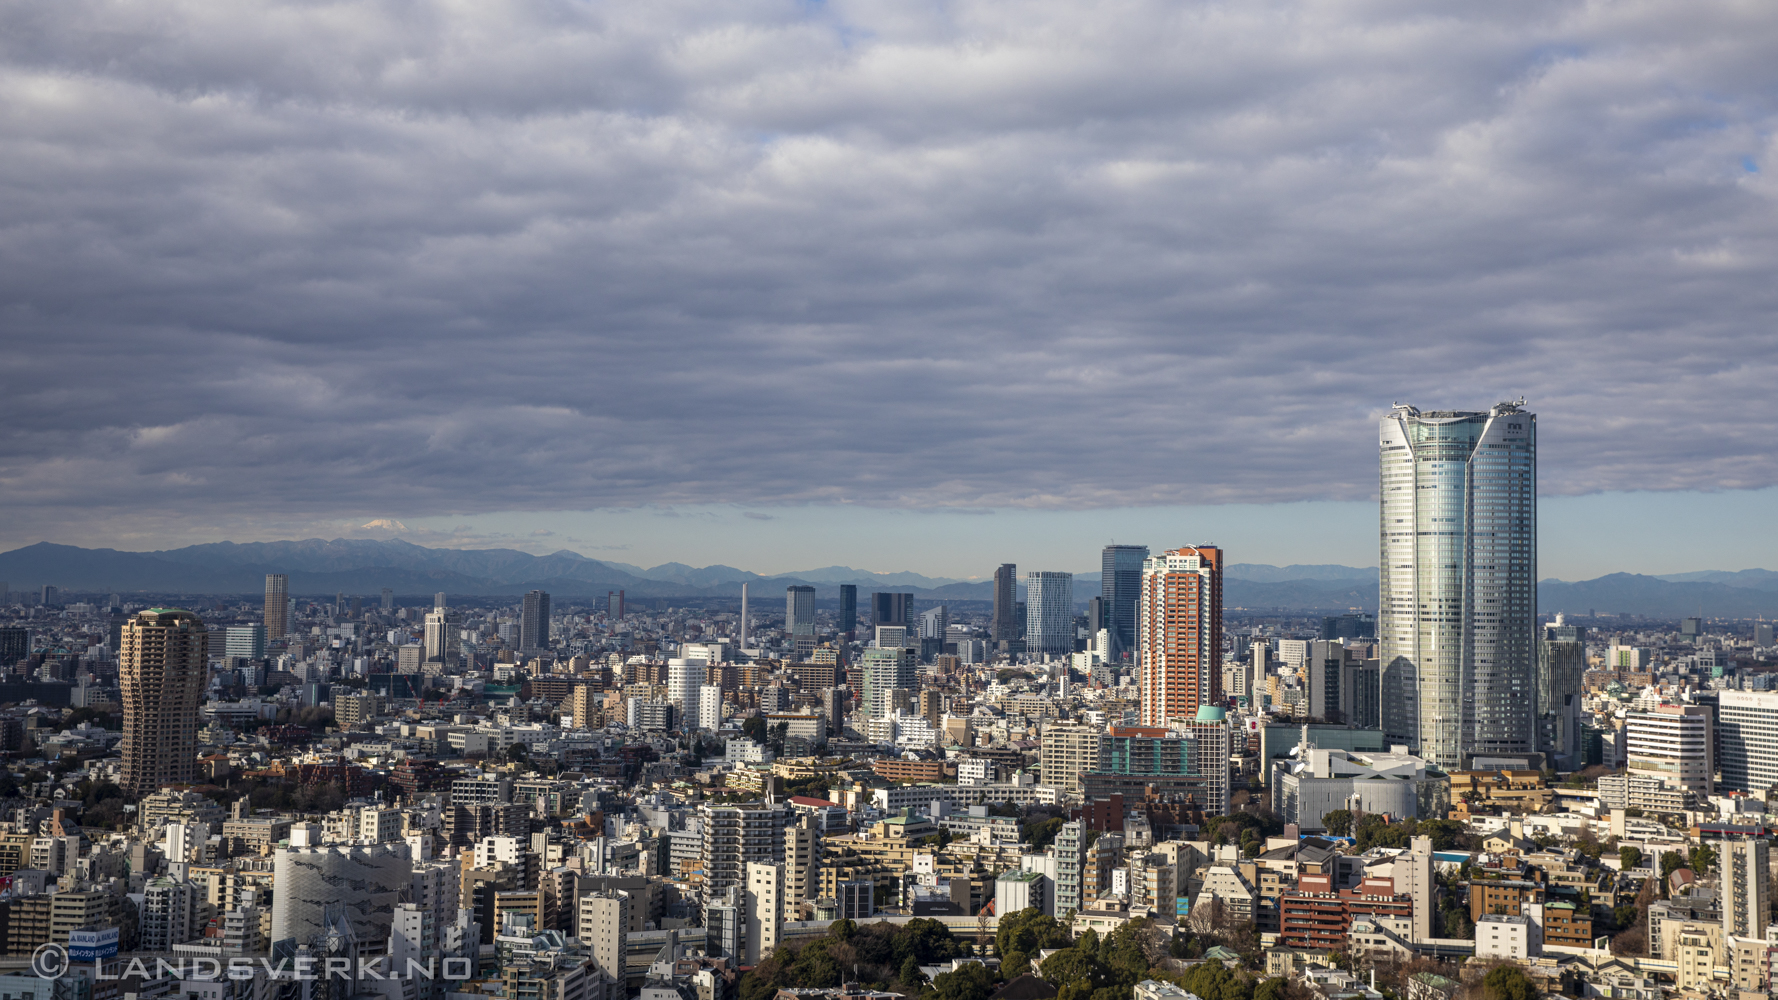 Mori Tower with Mt. Fuji in the distant background, Tokyo, Japan. 

(Canon EOS 5D Mark IV / Canon EF 24-70mm f/2.8 L II USM)